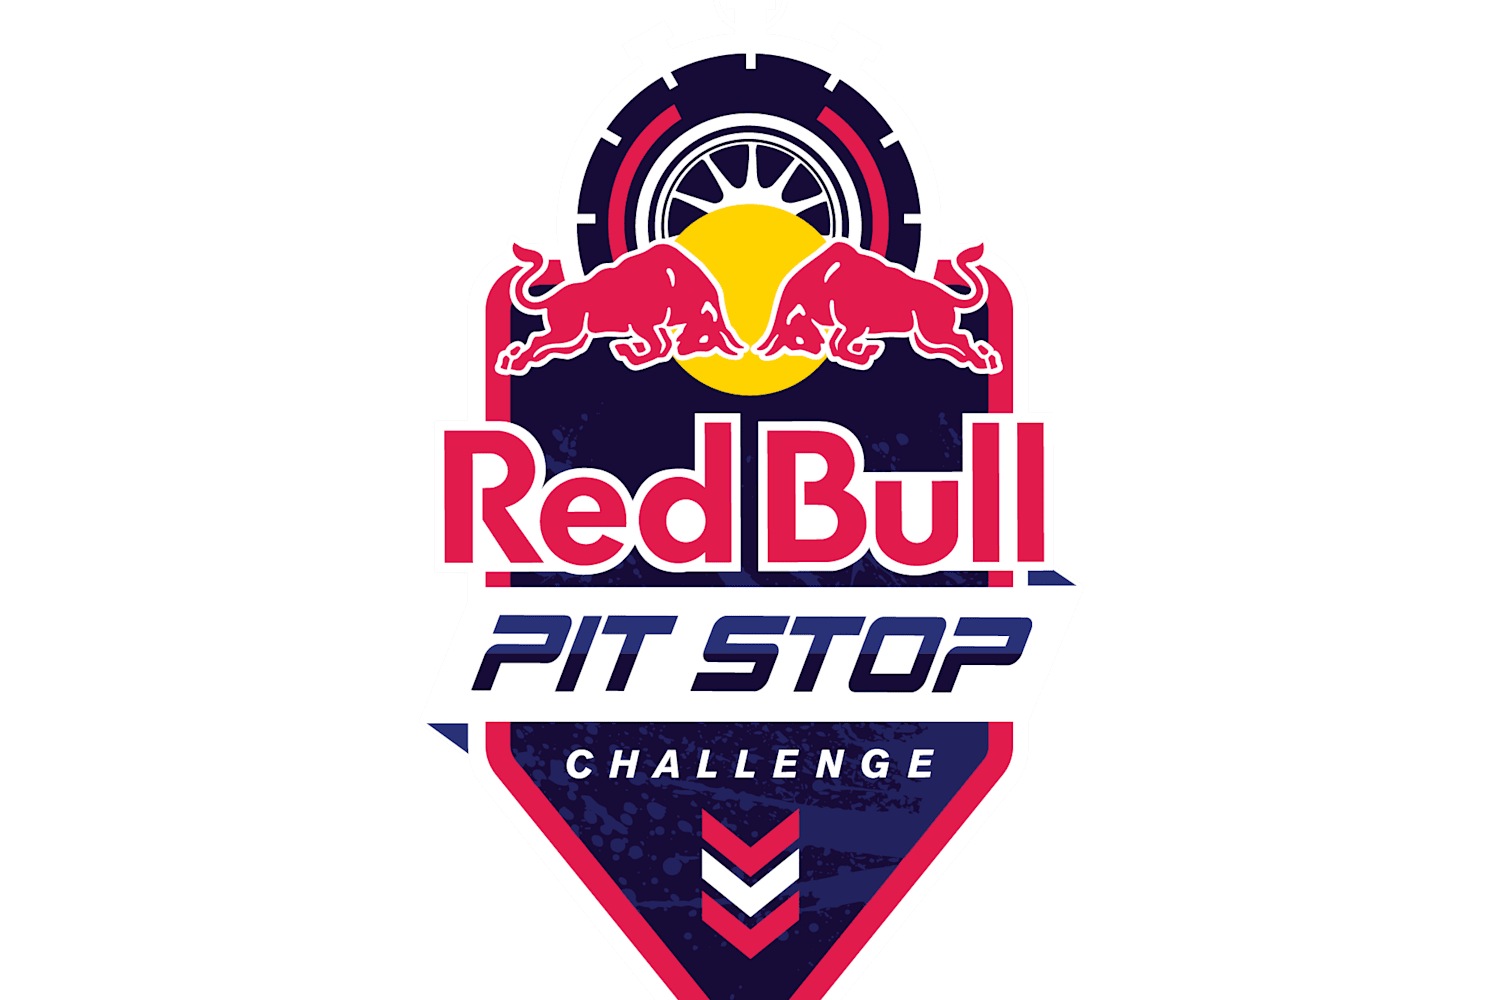 Red Bull Pit Stop Challenge Woolworths Video Portrait